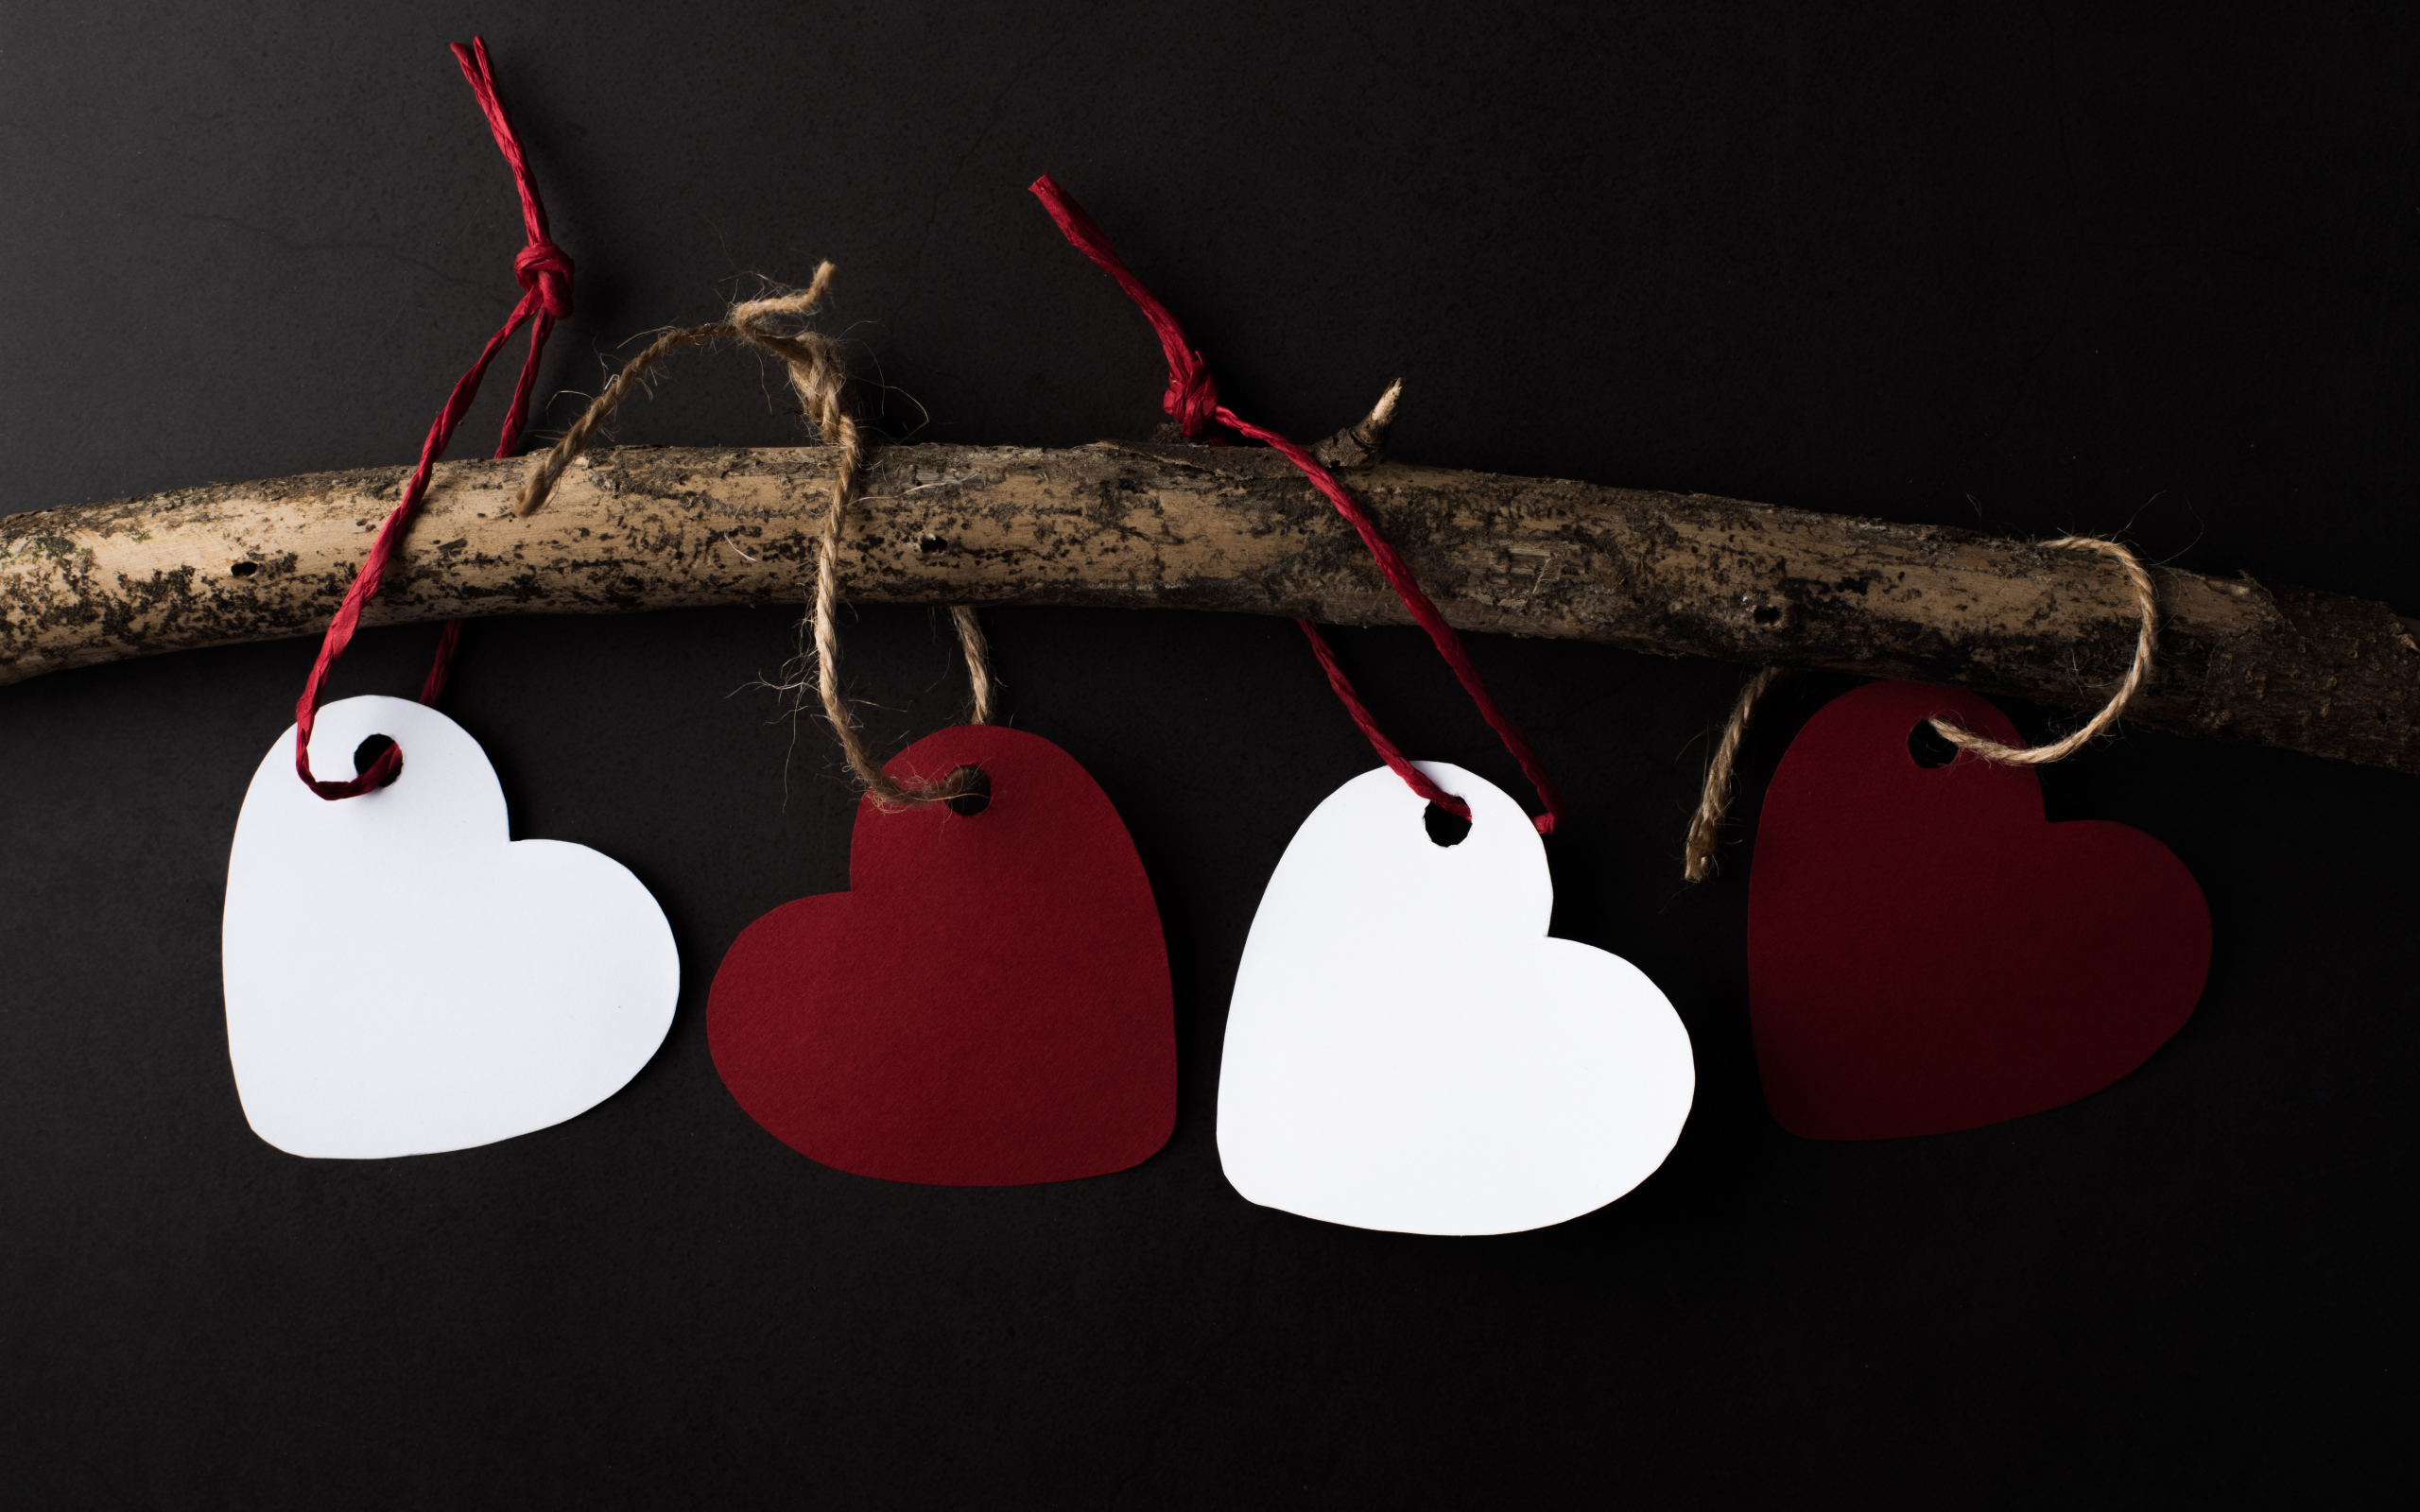 Paper hearts on a branch on a black background